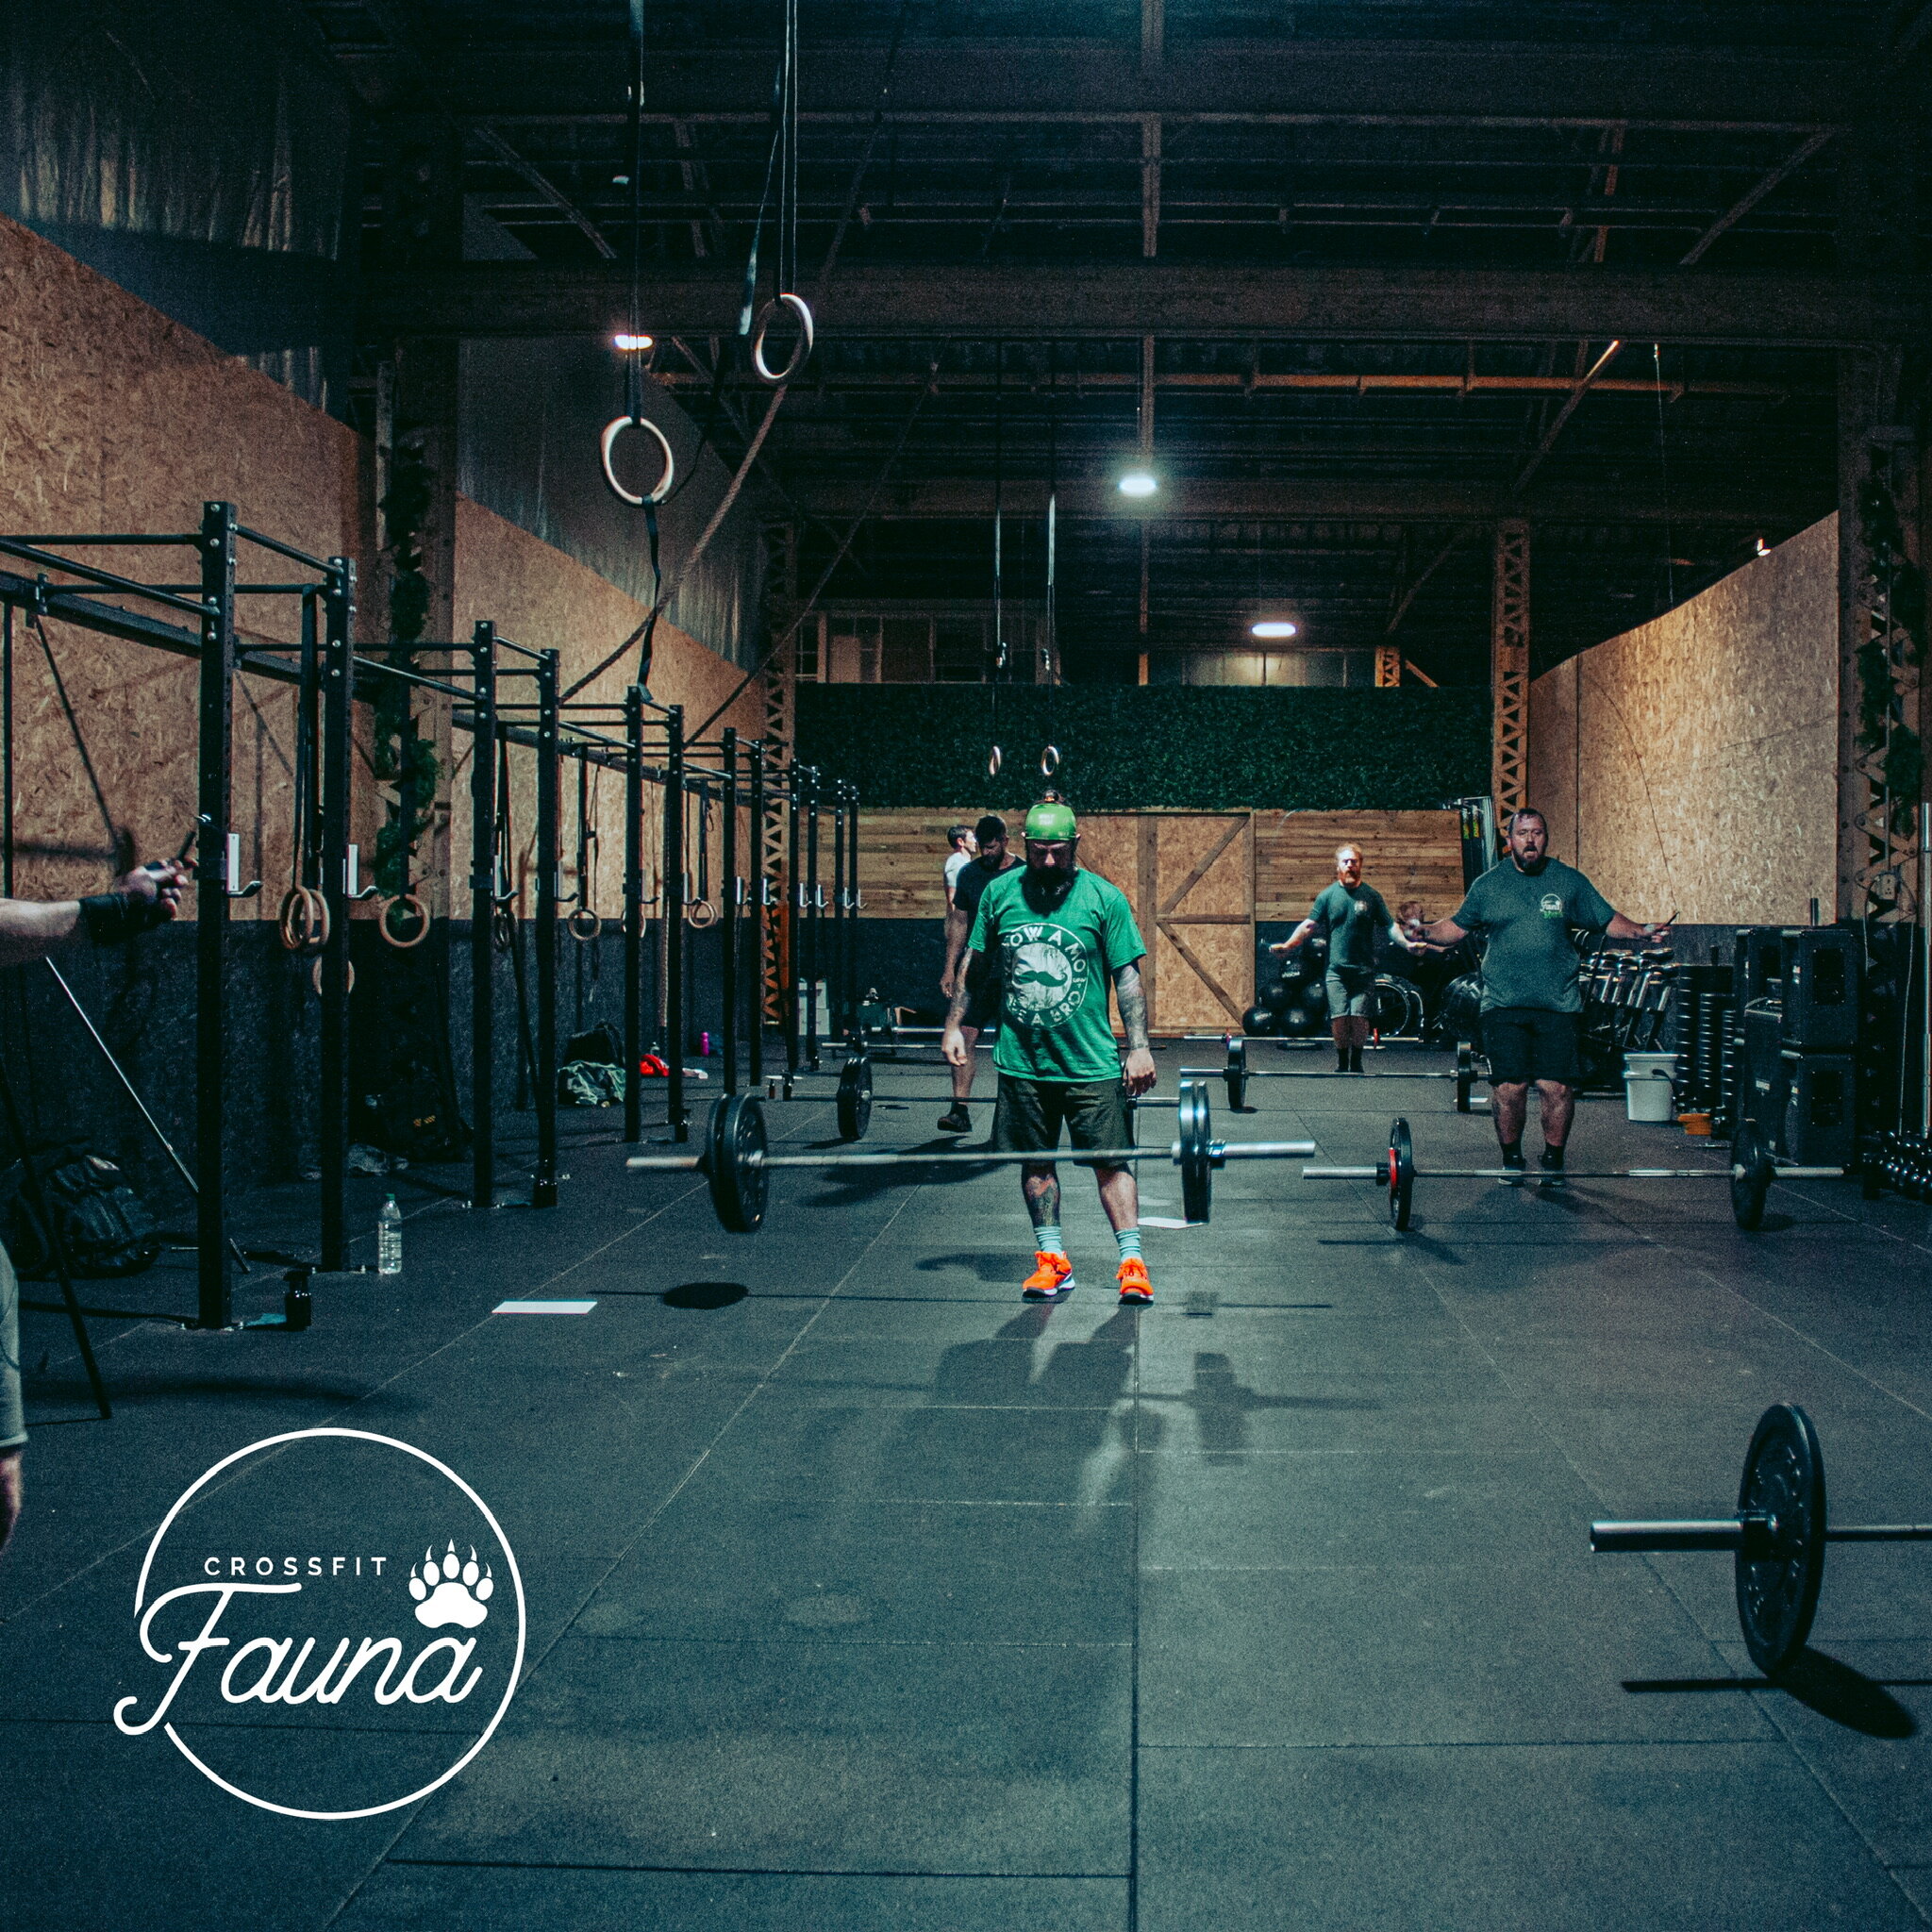 Here for the dark mornings and moody lighting. While winter makes the world hibernate, our members elevate 🔥

Proud of each and every one of them. 

#crossfitfauna #fauna #exploremorebecomemore 

#wintergrind #crossfitgym #barbellworkout #exercise #